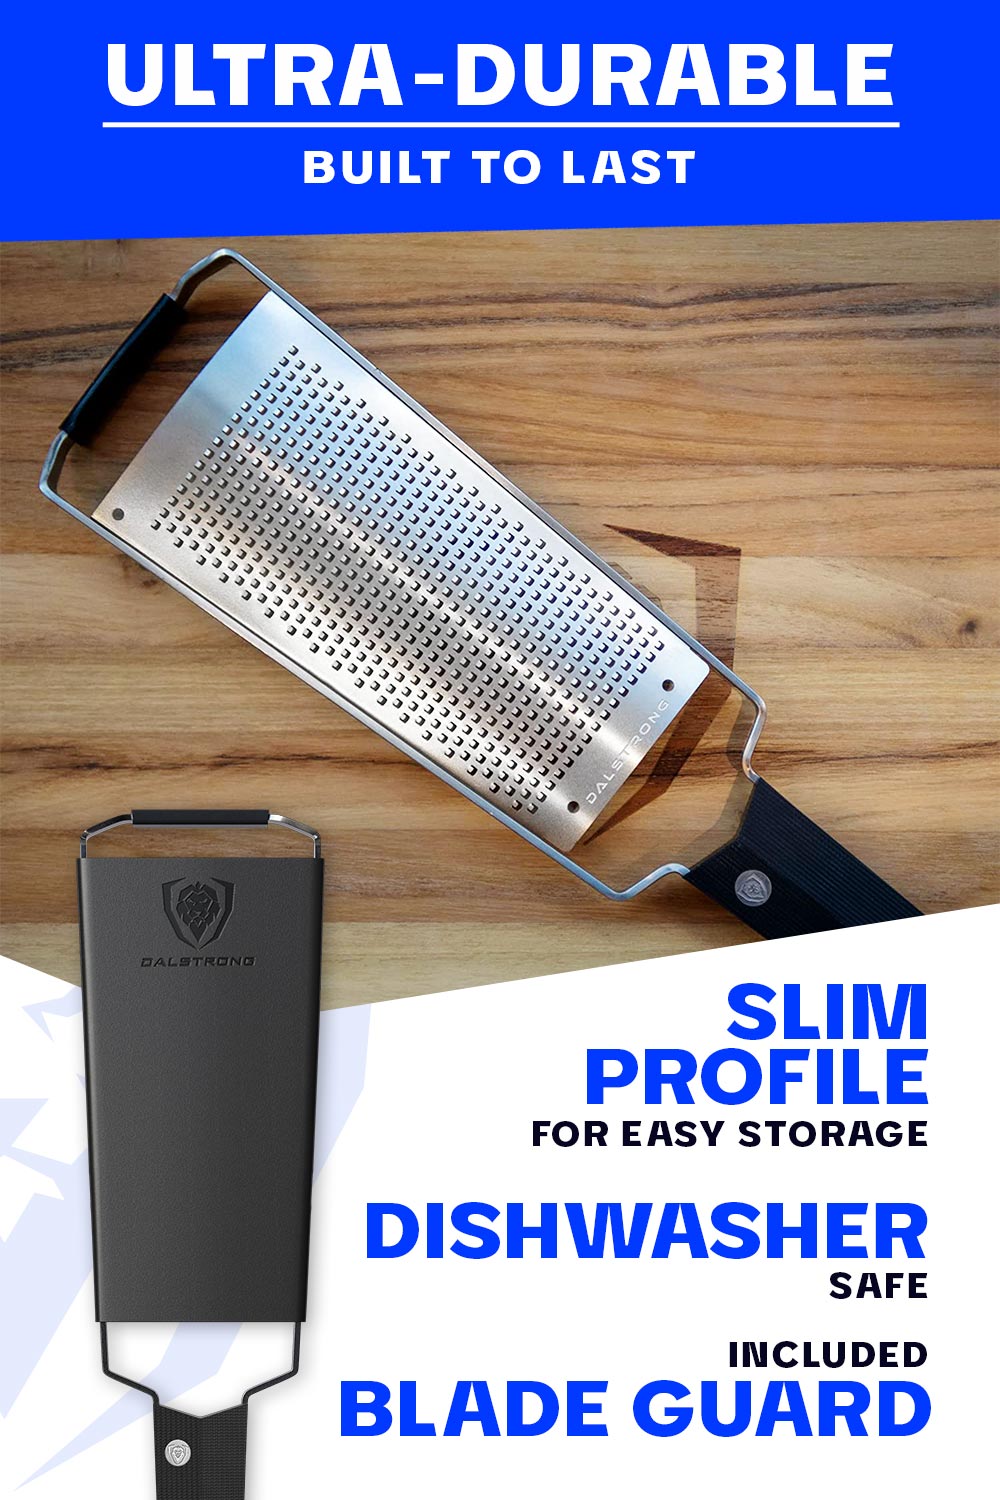 Dalstrong professional fine wide cheese grater featuring it's ultra durable and slim design.